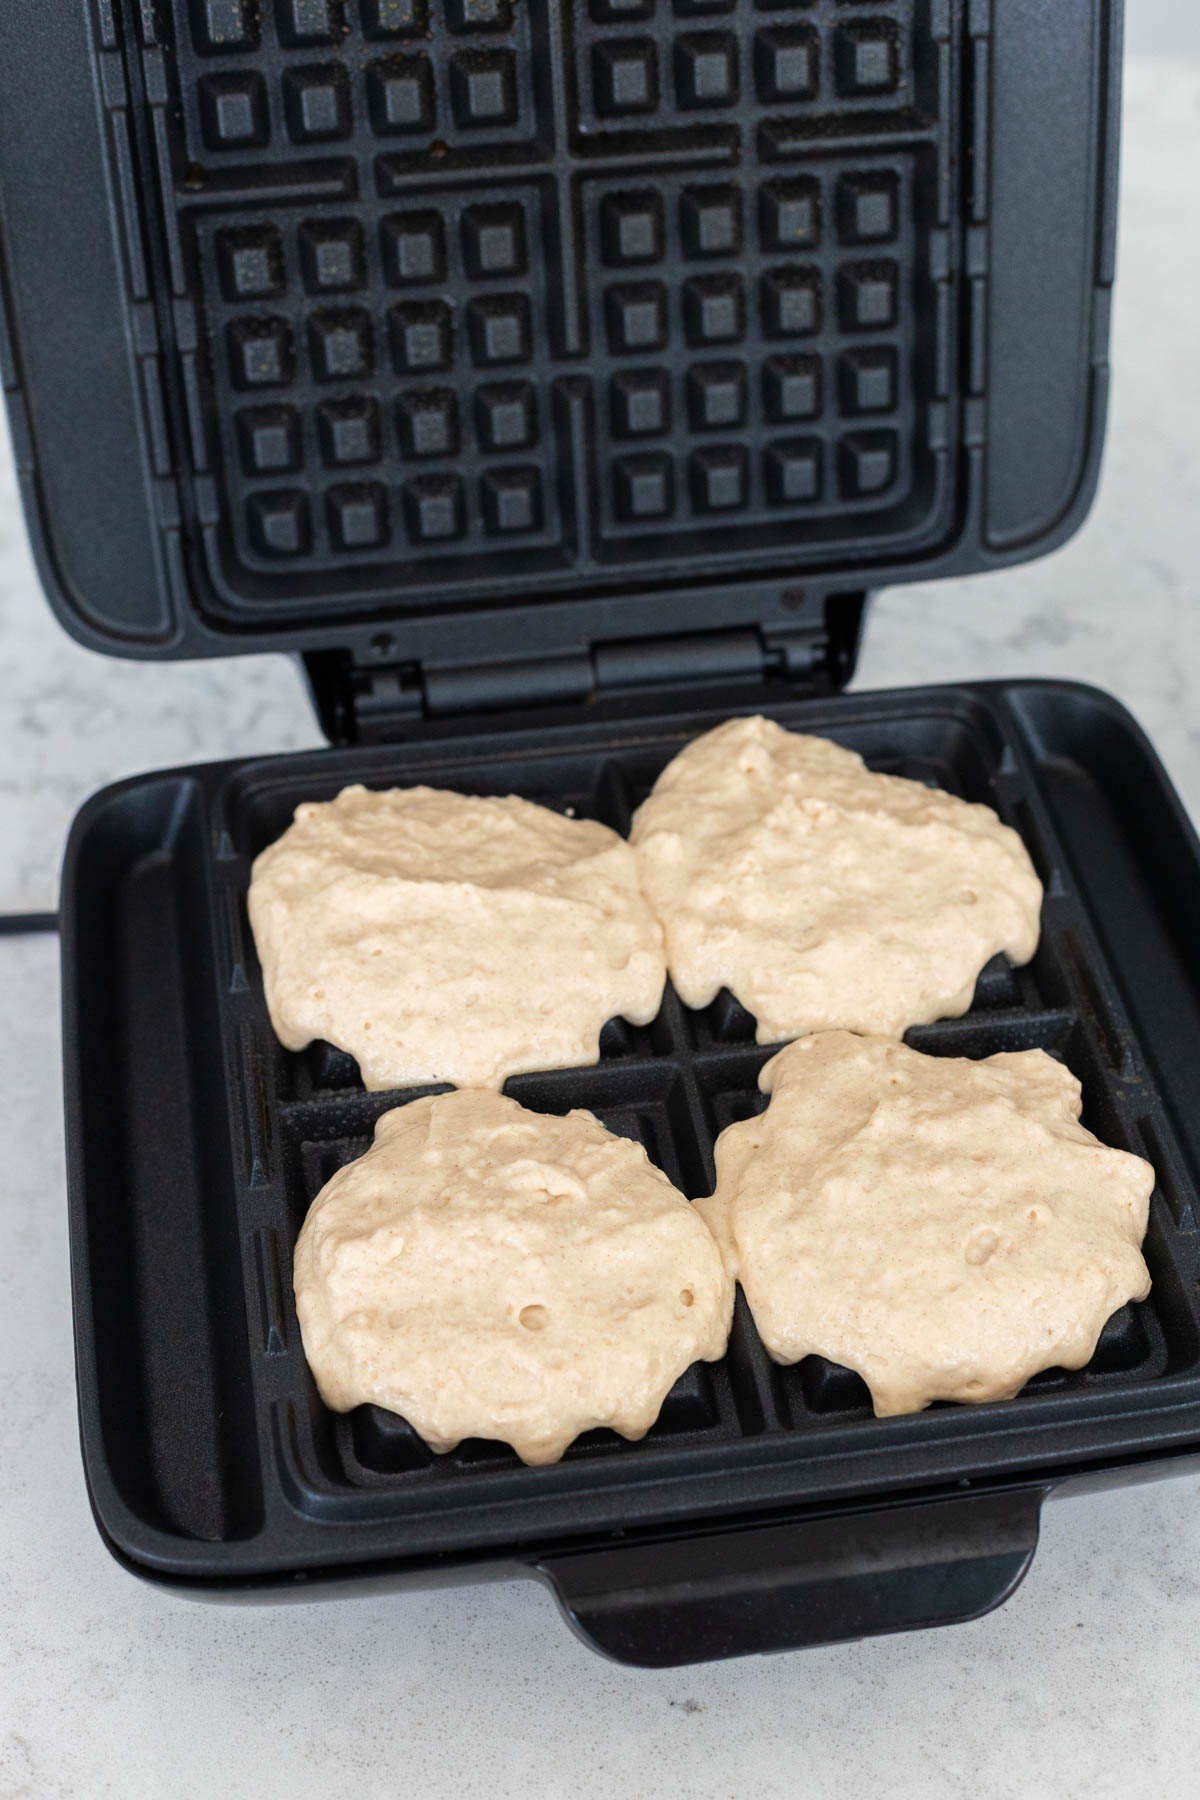 The waffle iron has been filled with 4 scoops of waffle batter.